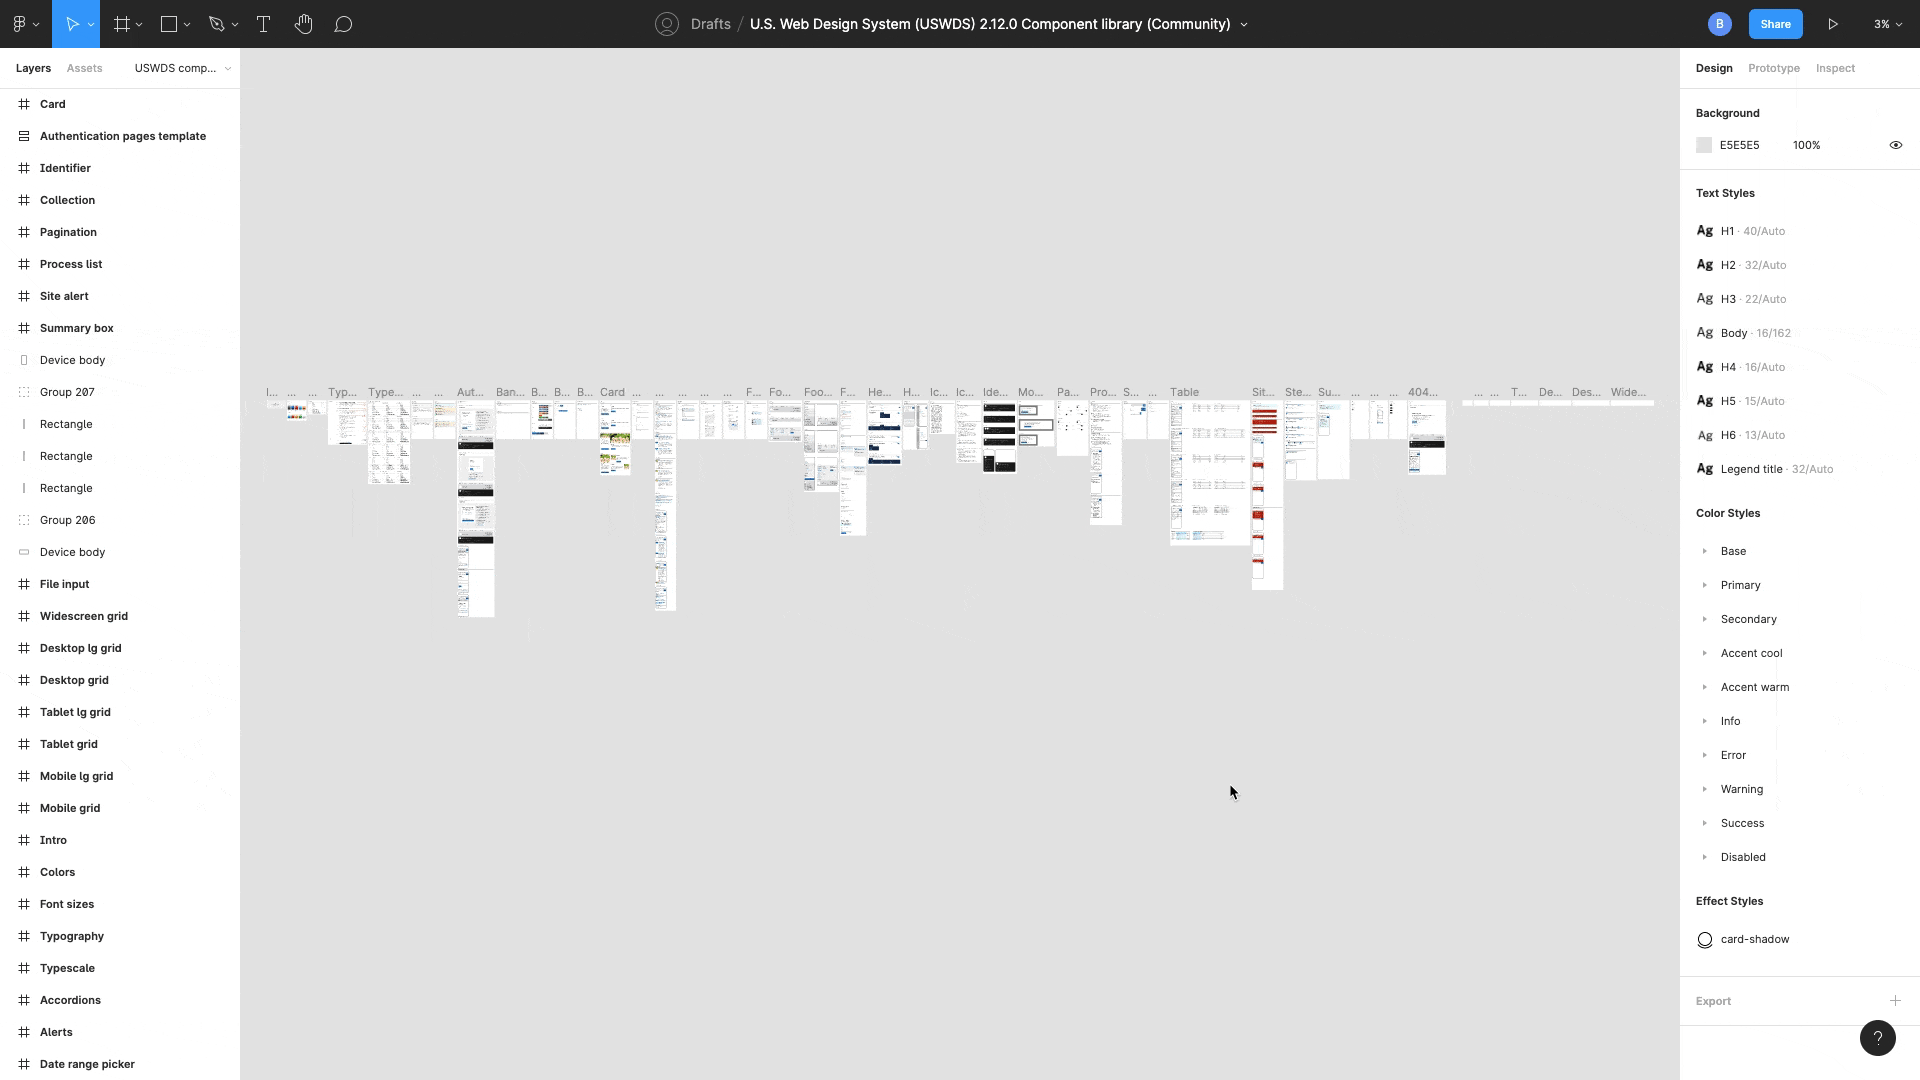 GIF demonstrating how to navigate through Figma's community page to duplicate the U.S. Web Design System library created by Truss.